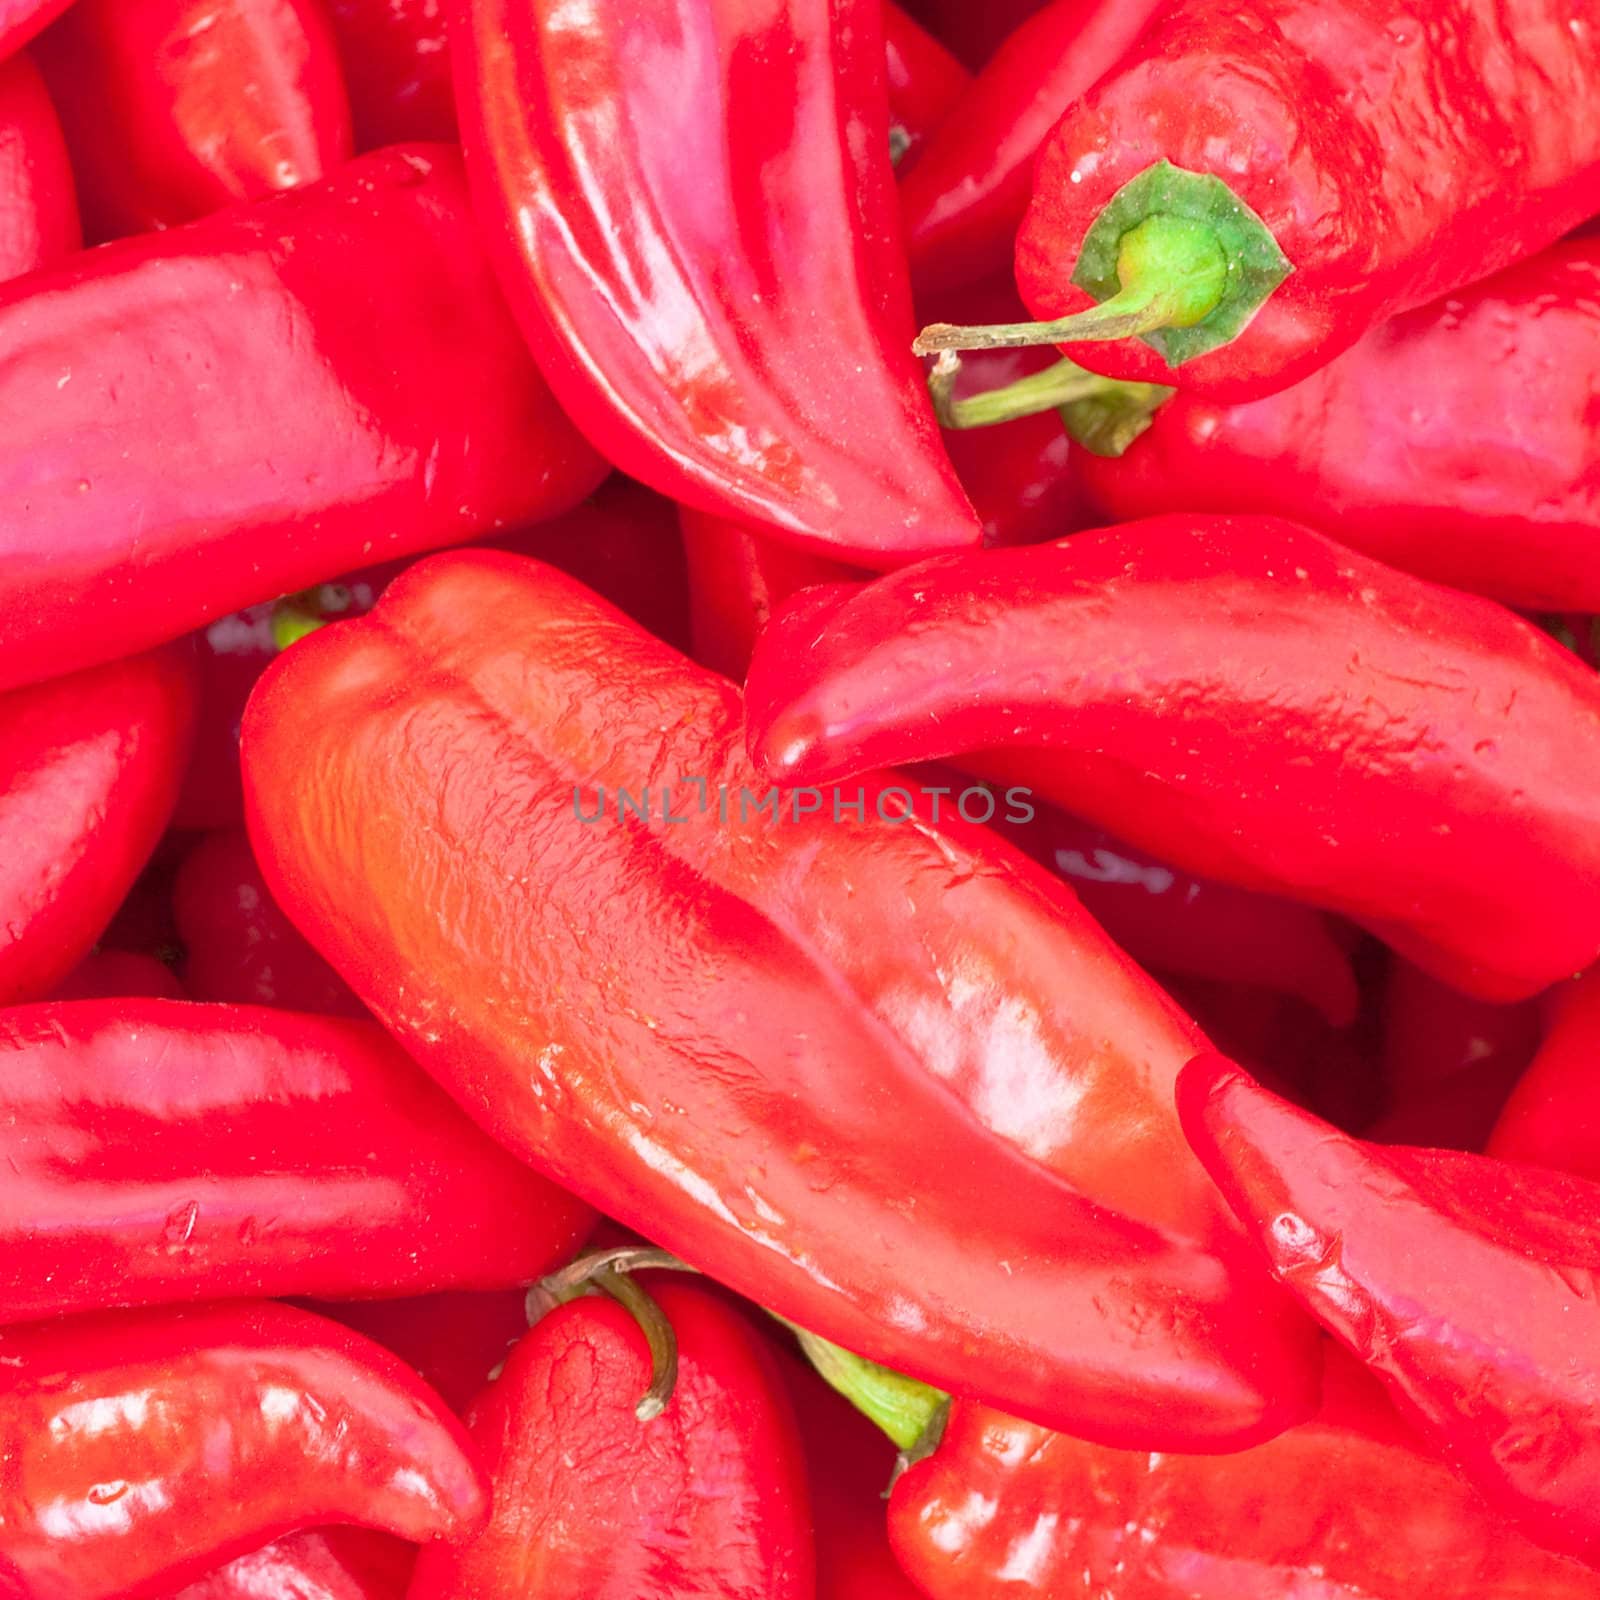 Background image composed of fresh jalapeno peppers